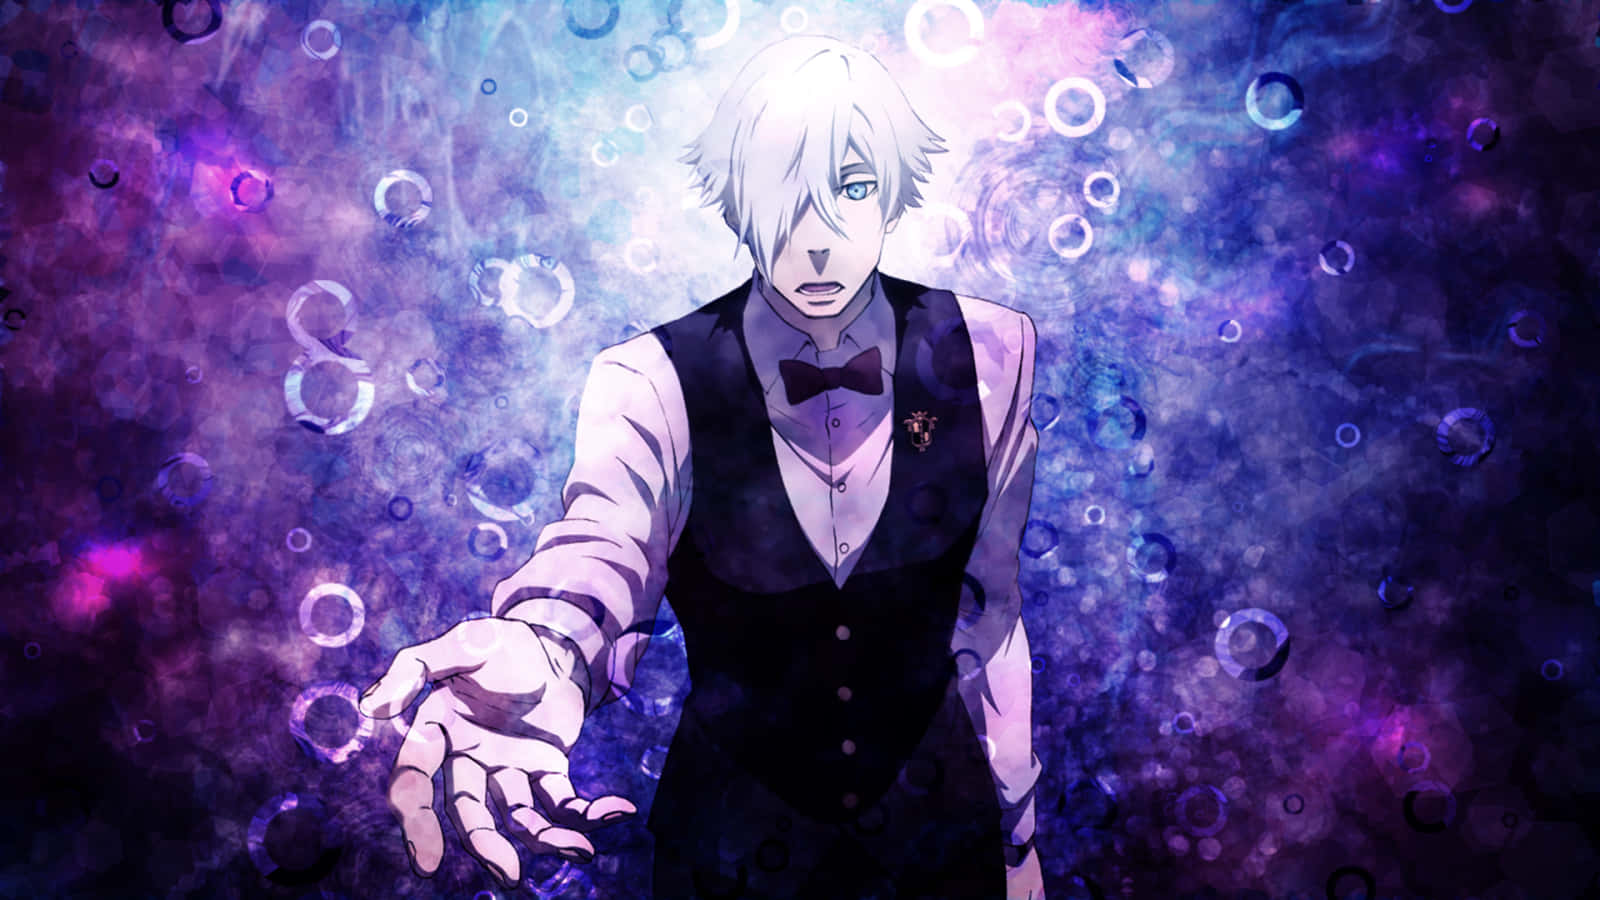 The mysterious world of Death Parade